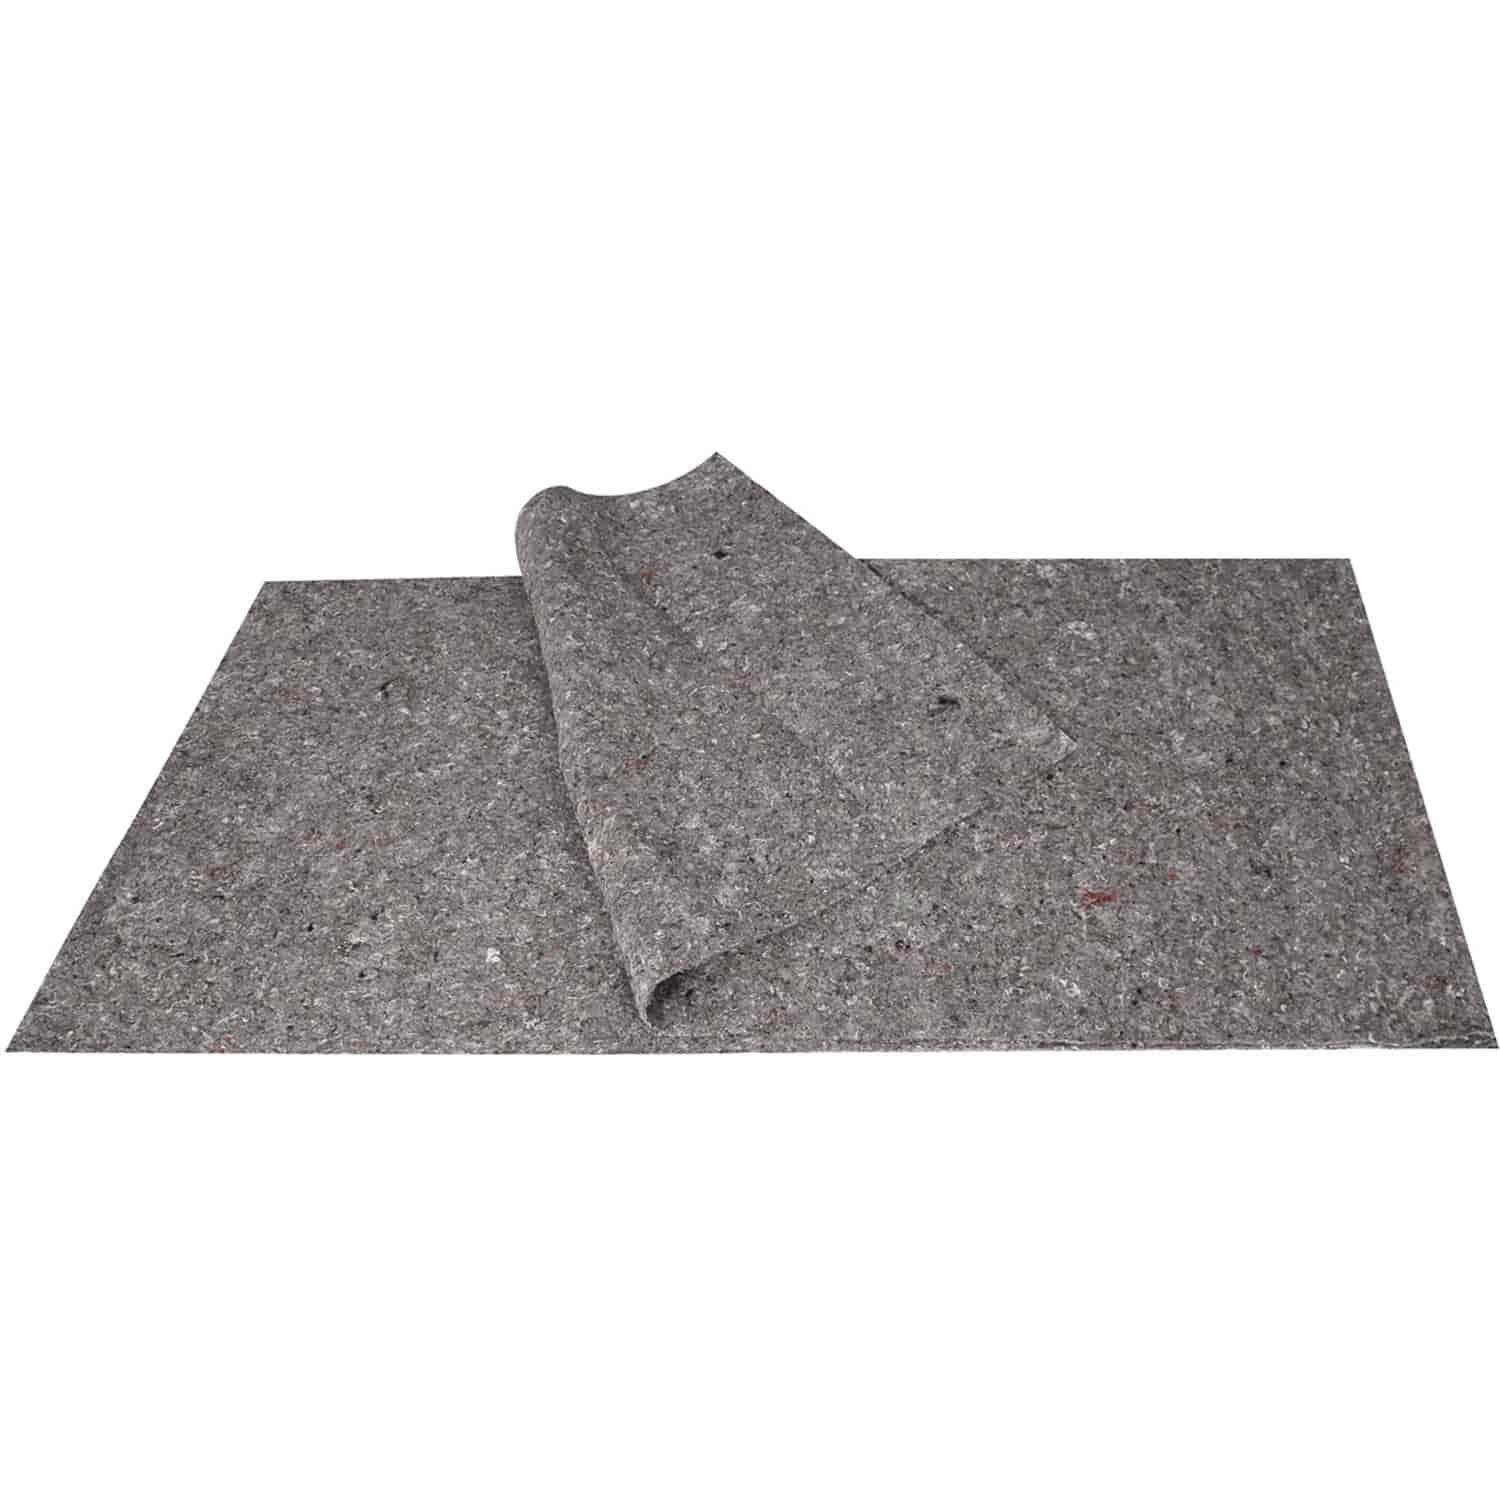 Insulation Headliner Fits Select 1938-2004 Cadillac Models [3/8 in. Thick, 12 ft. x 3 ft.]